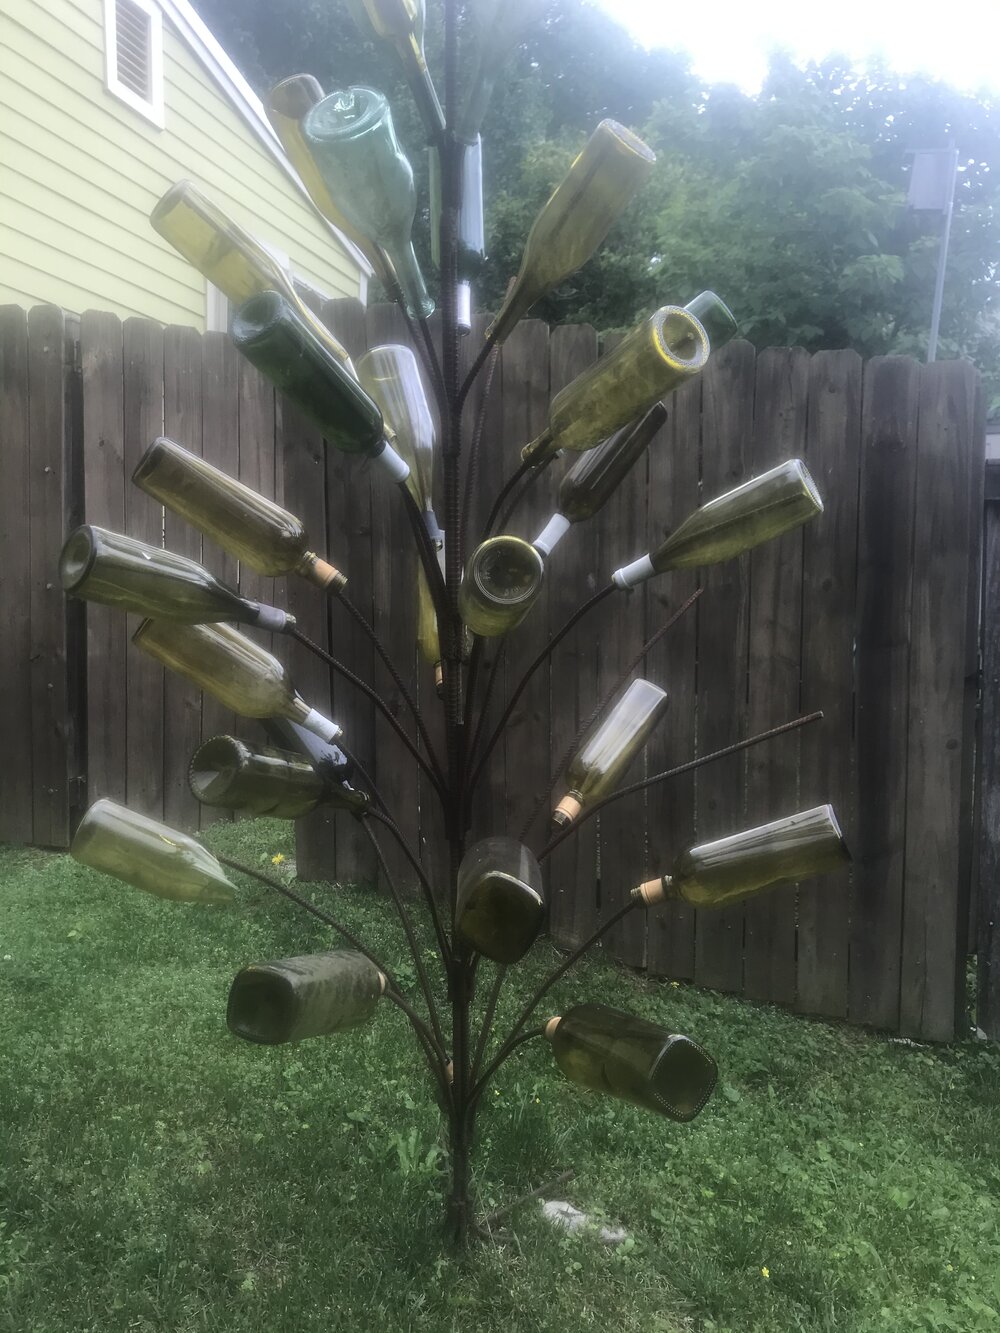  He also told me this bottle tree - made by his father, a welder - was used in “parts of Africa” to ward off evil spirits. Not that I didn’t believe him, but I did Google it as soon as I got home. The idea is thought to have originated in the Congo.&